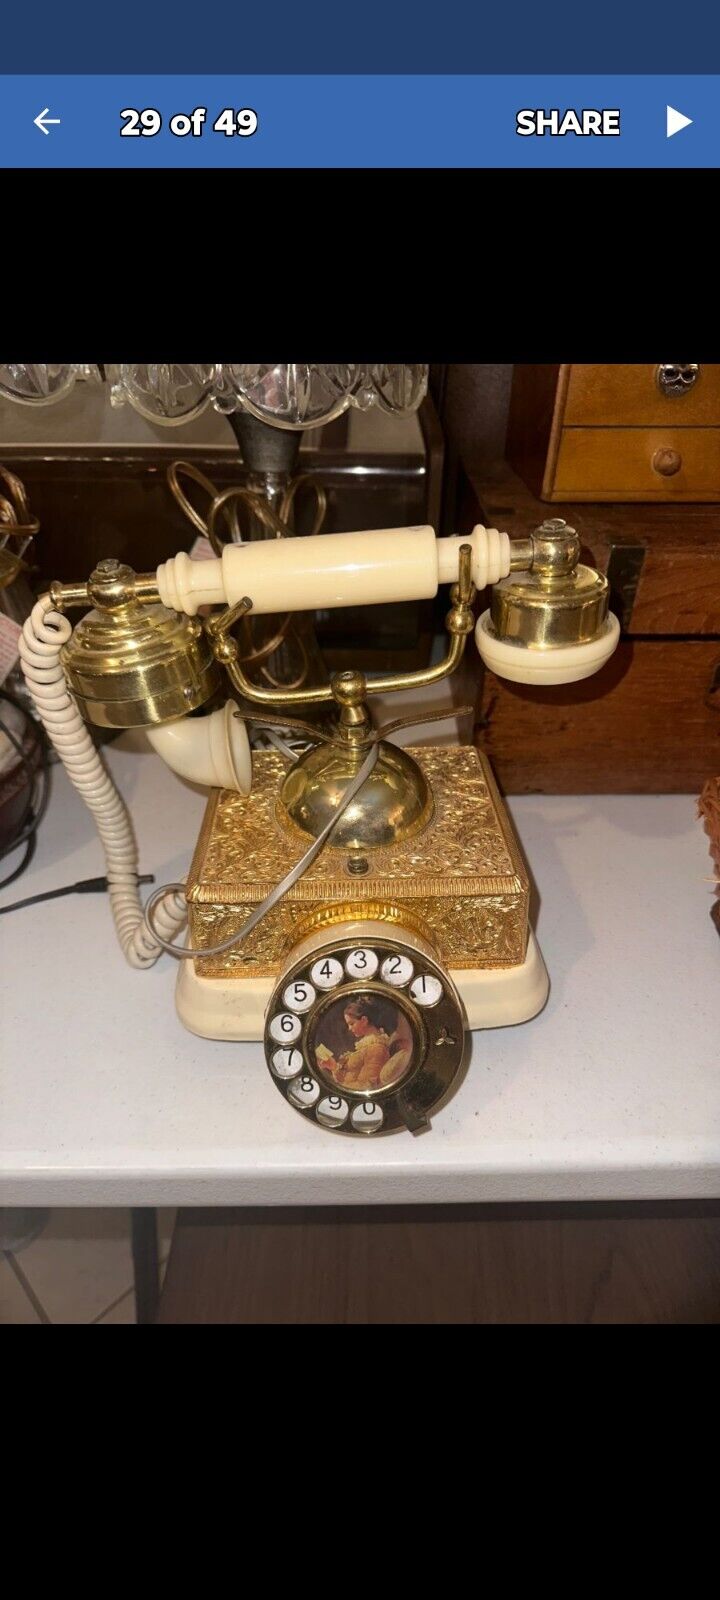 Vintage French Style Rotary Phone